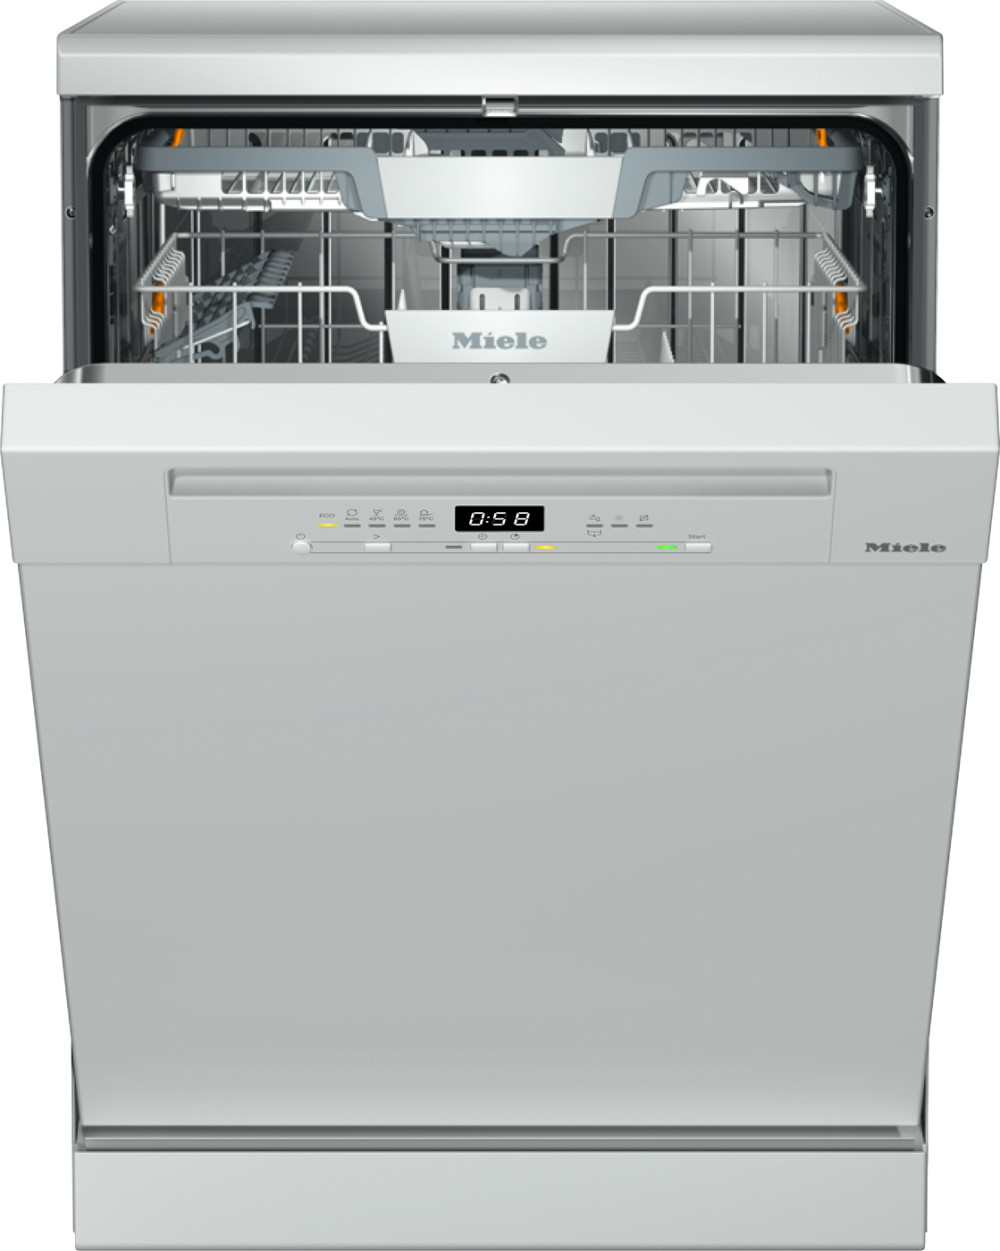 Miele G 5310 SC White Freestanding Dishwasher featured image